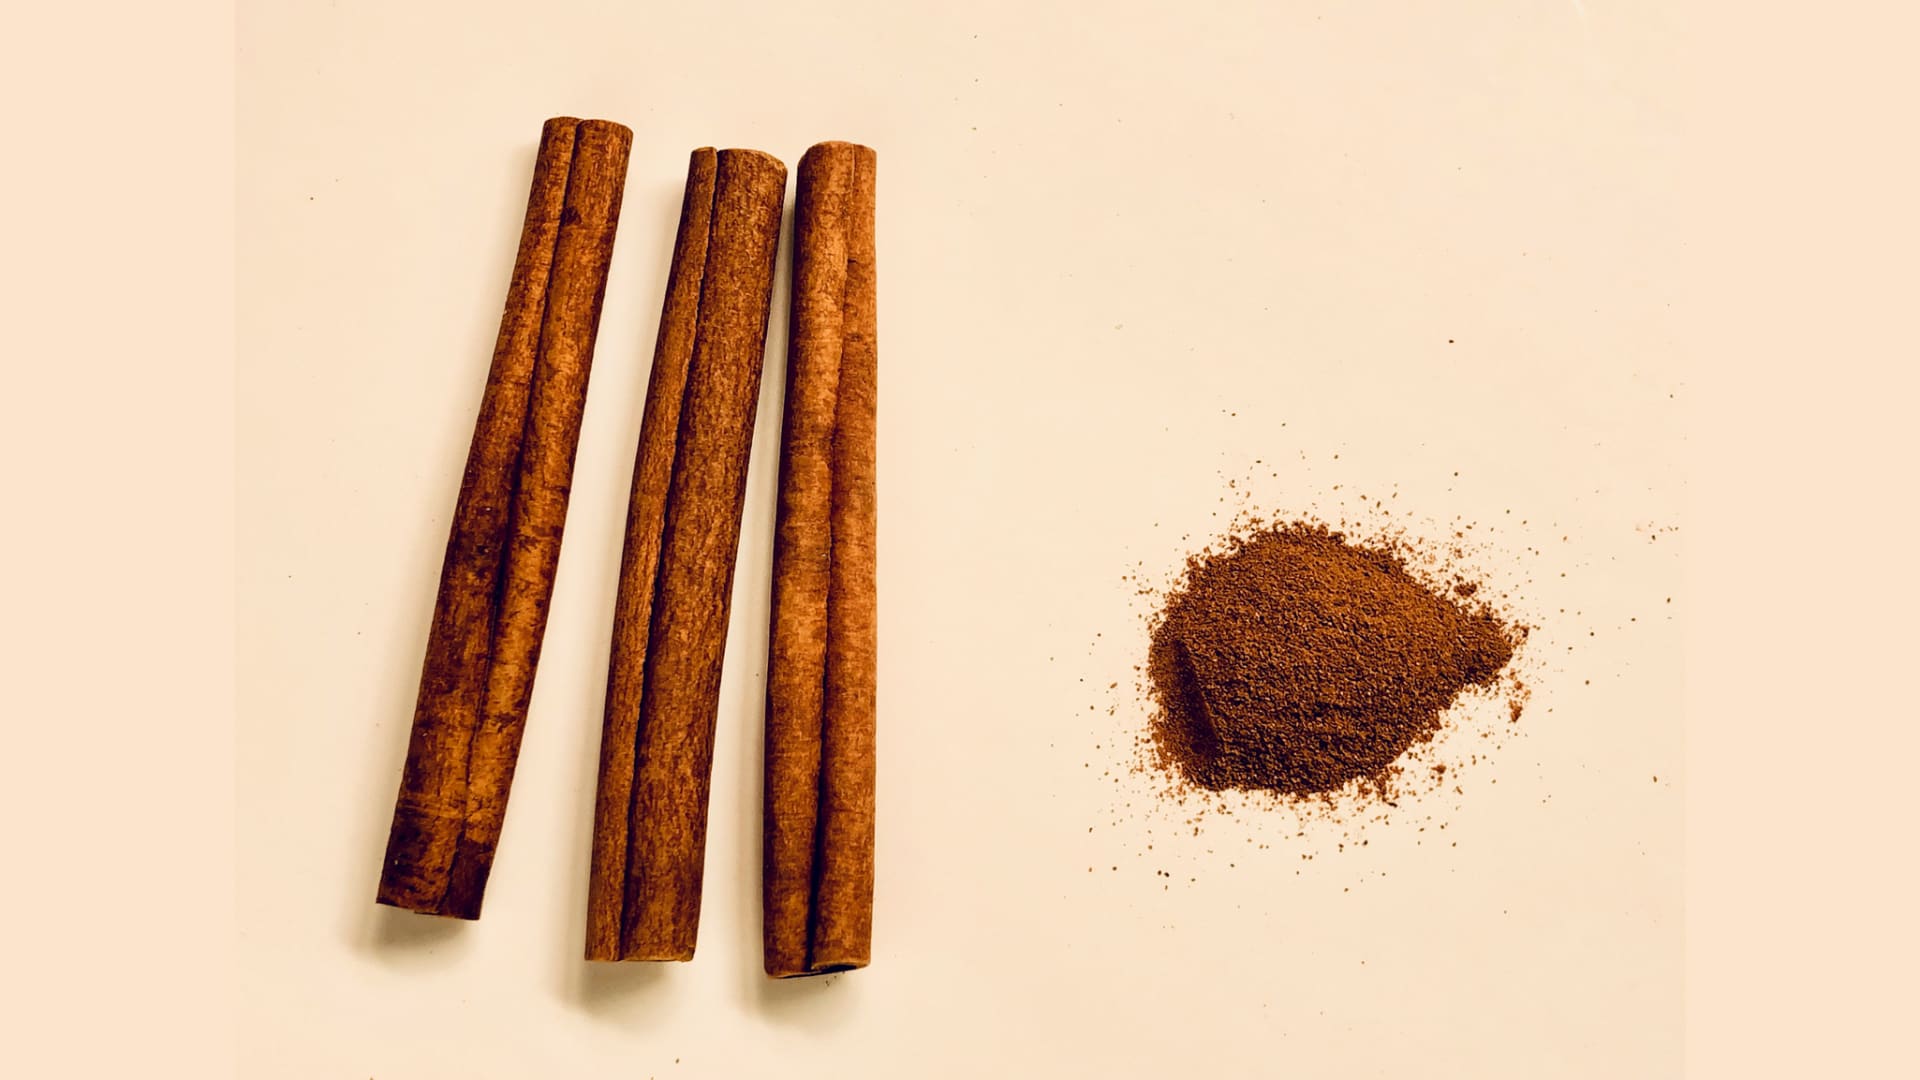 Science Says Smelling Cinnamon Can Make You Much More Creative and Innovative (but Not for the Reason You Might Think)